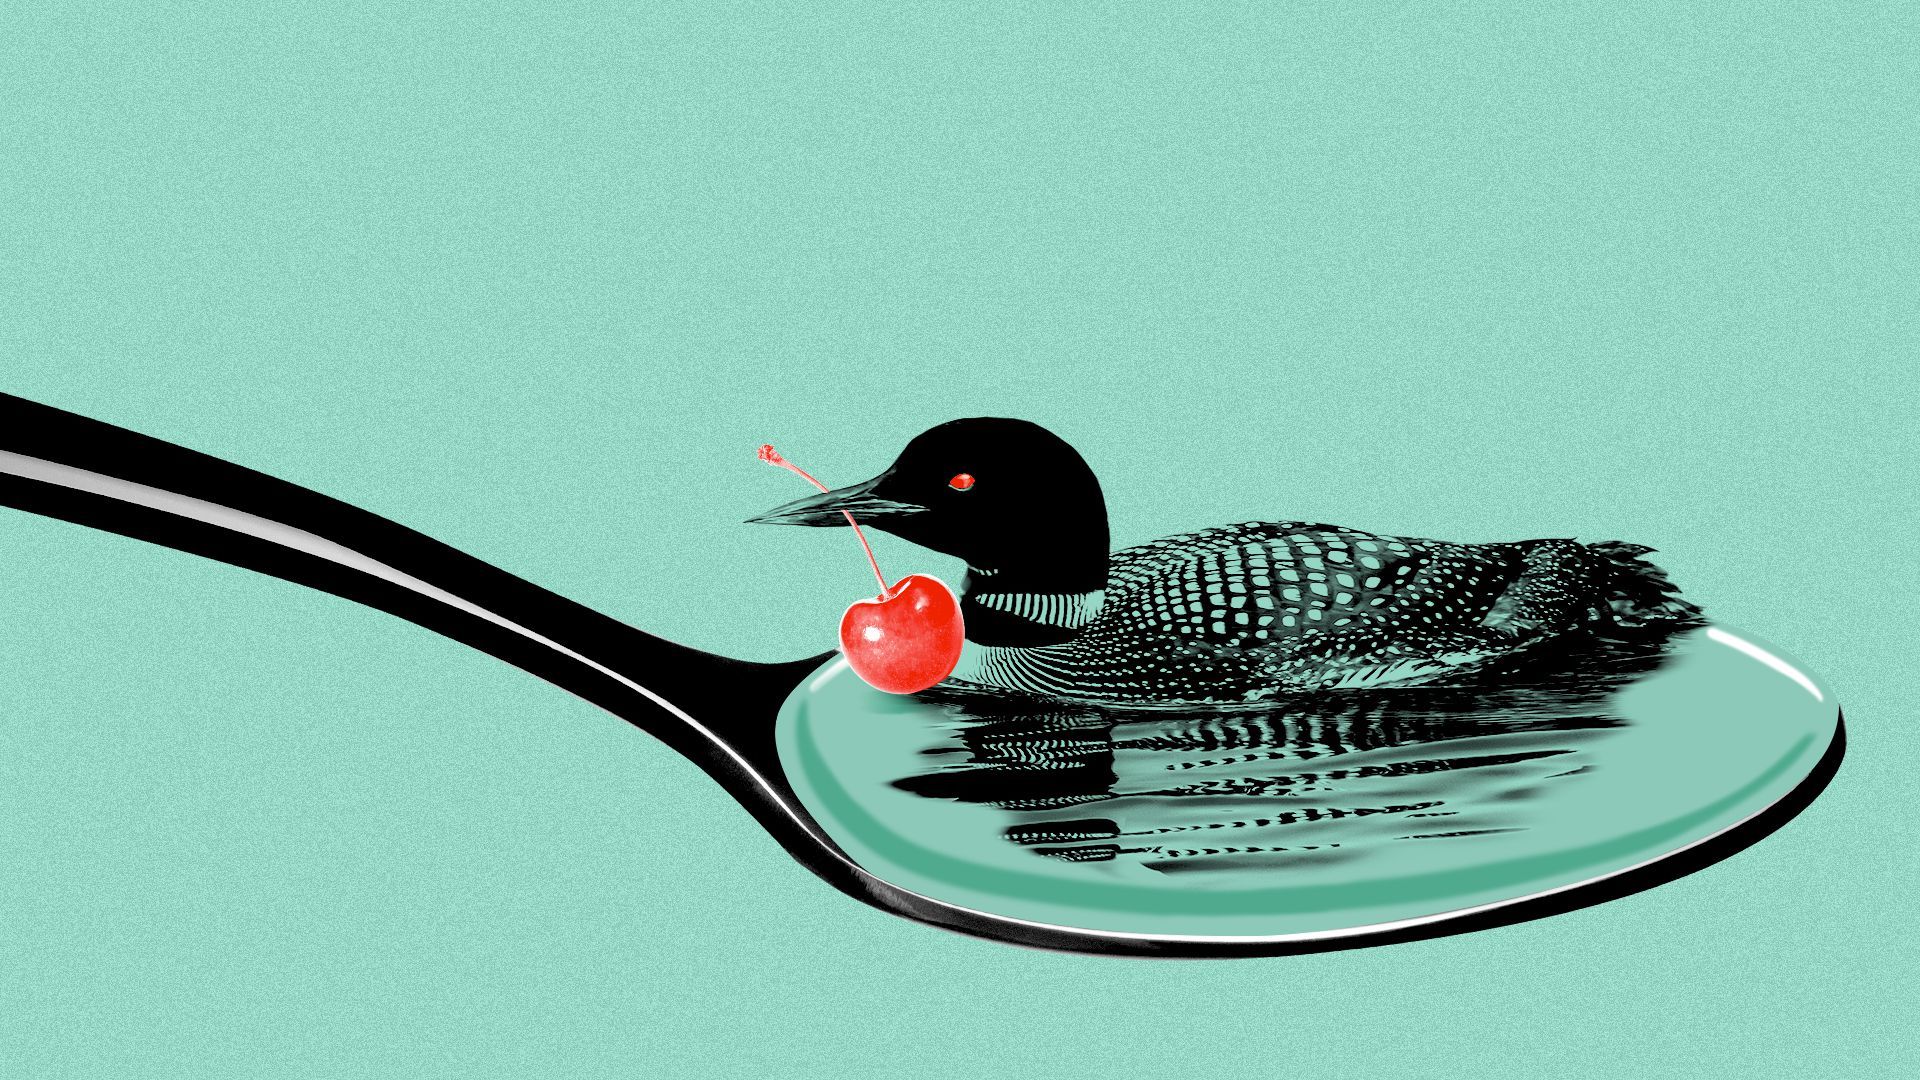 Illustration of a loon sitting on a spoon, with a cherry in its mouth.